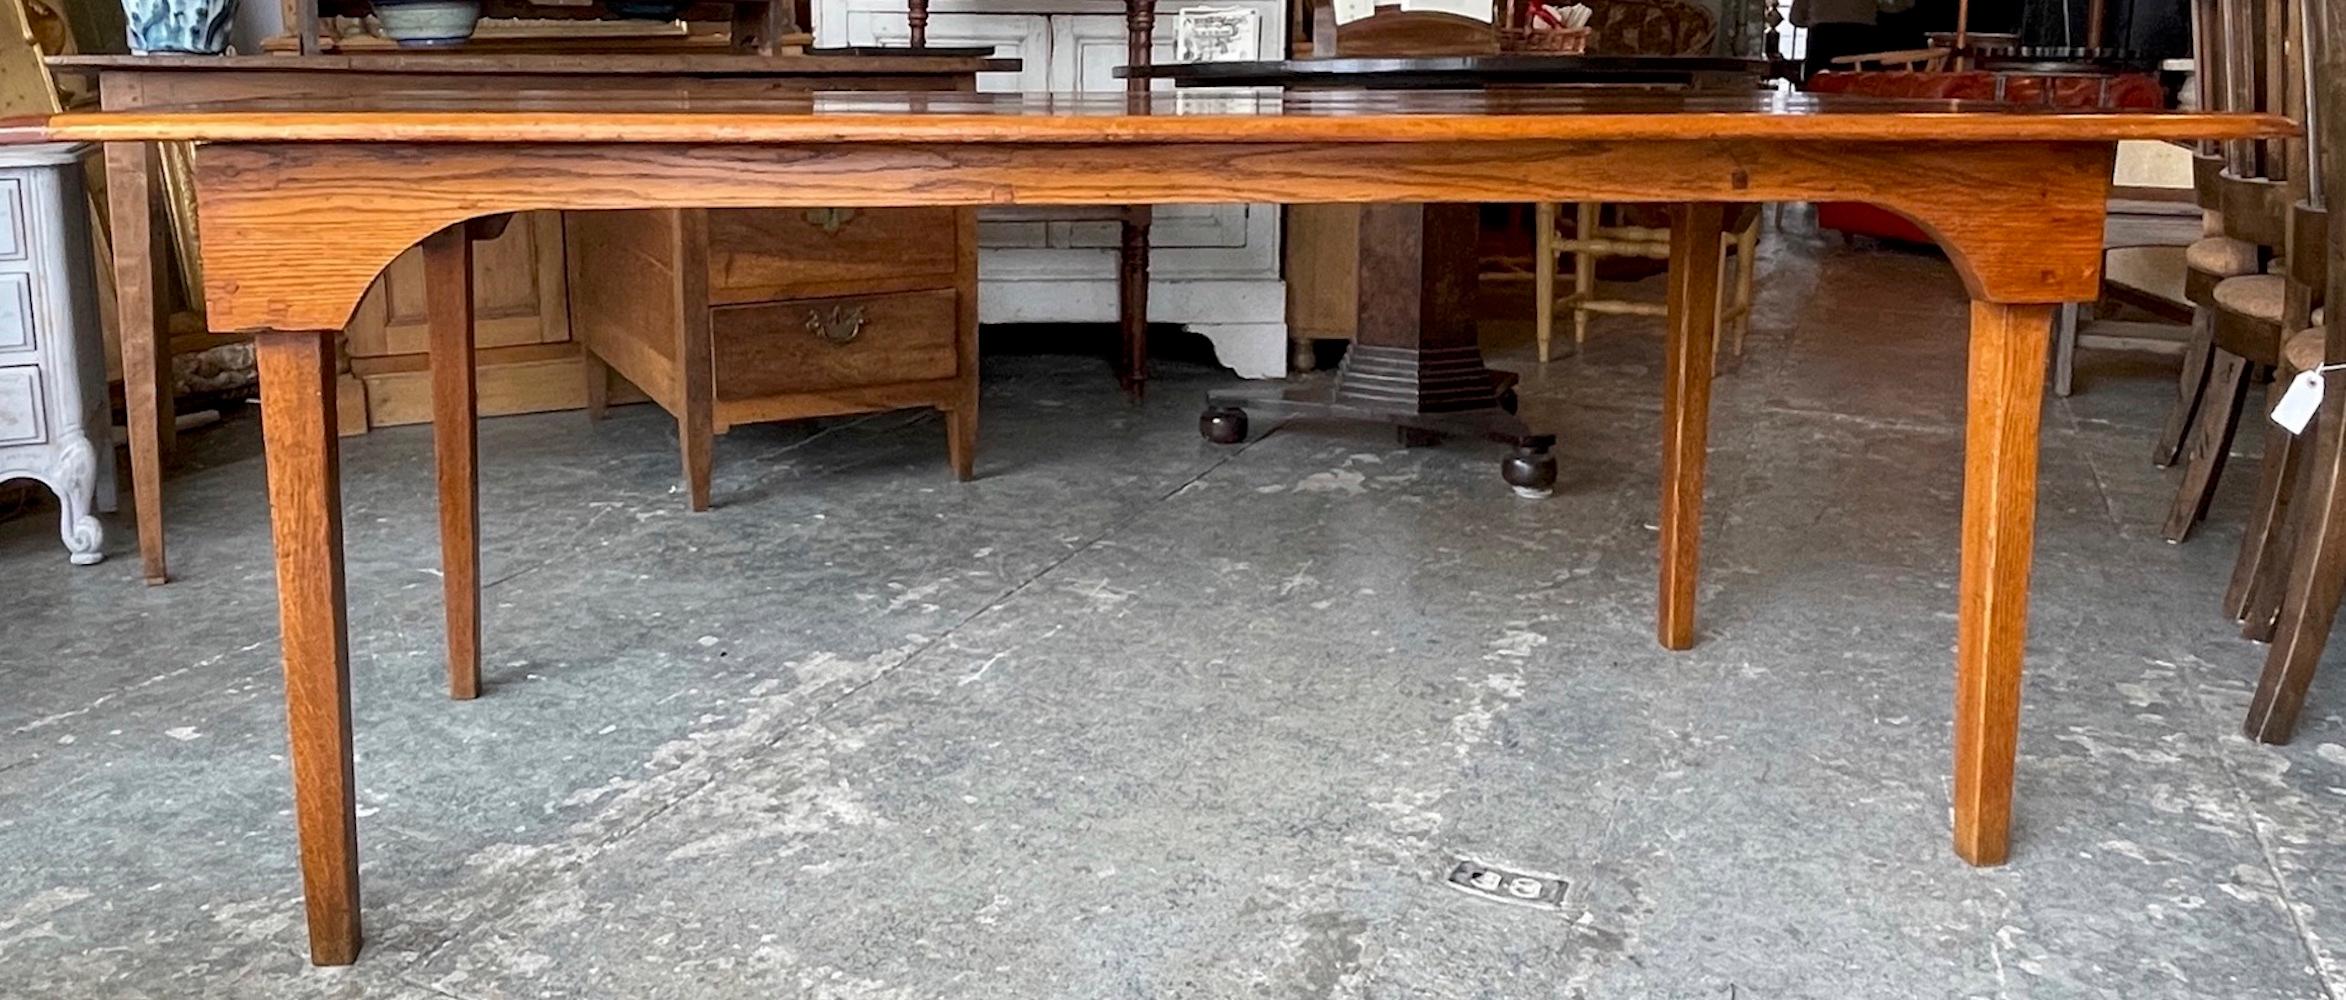 Here we have a beautiful 19th century French refectory table. Ot is handmade where it was assembled together by using pegs rather that nails. It is in very good condition considering its age and usage.